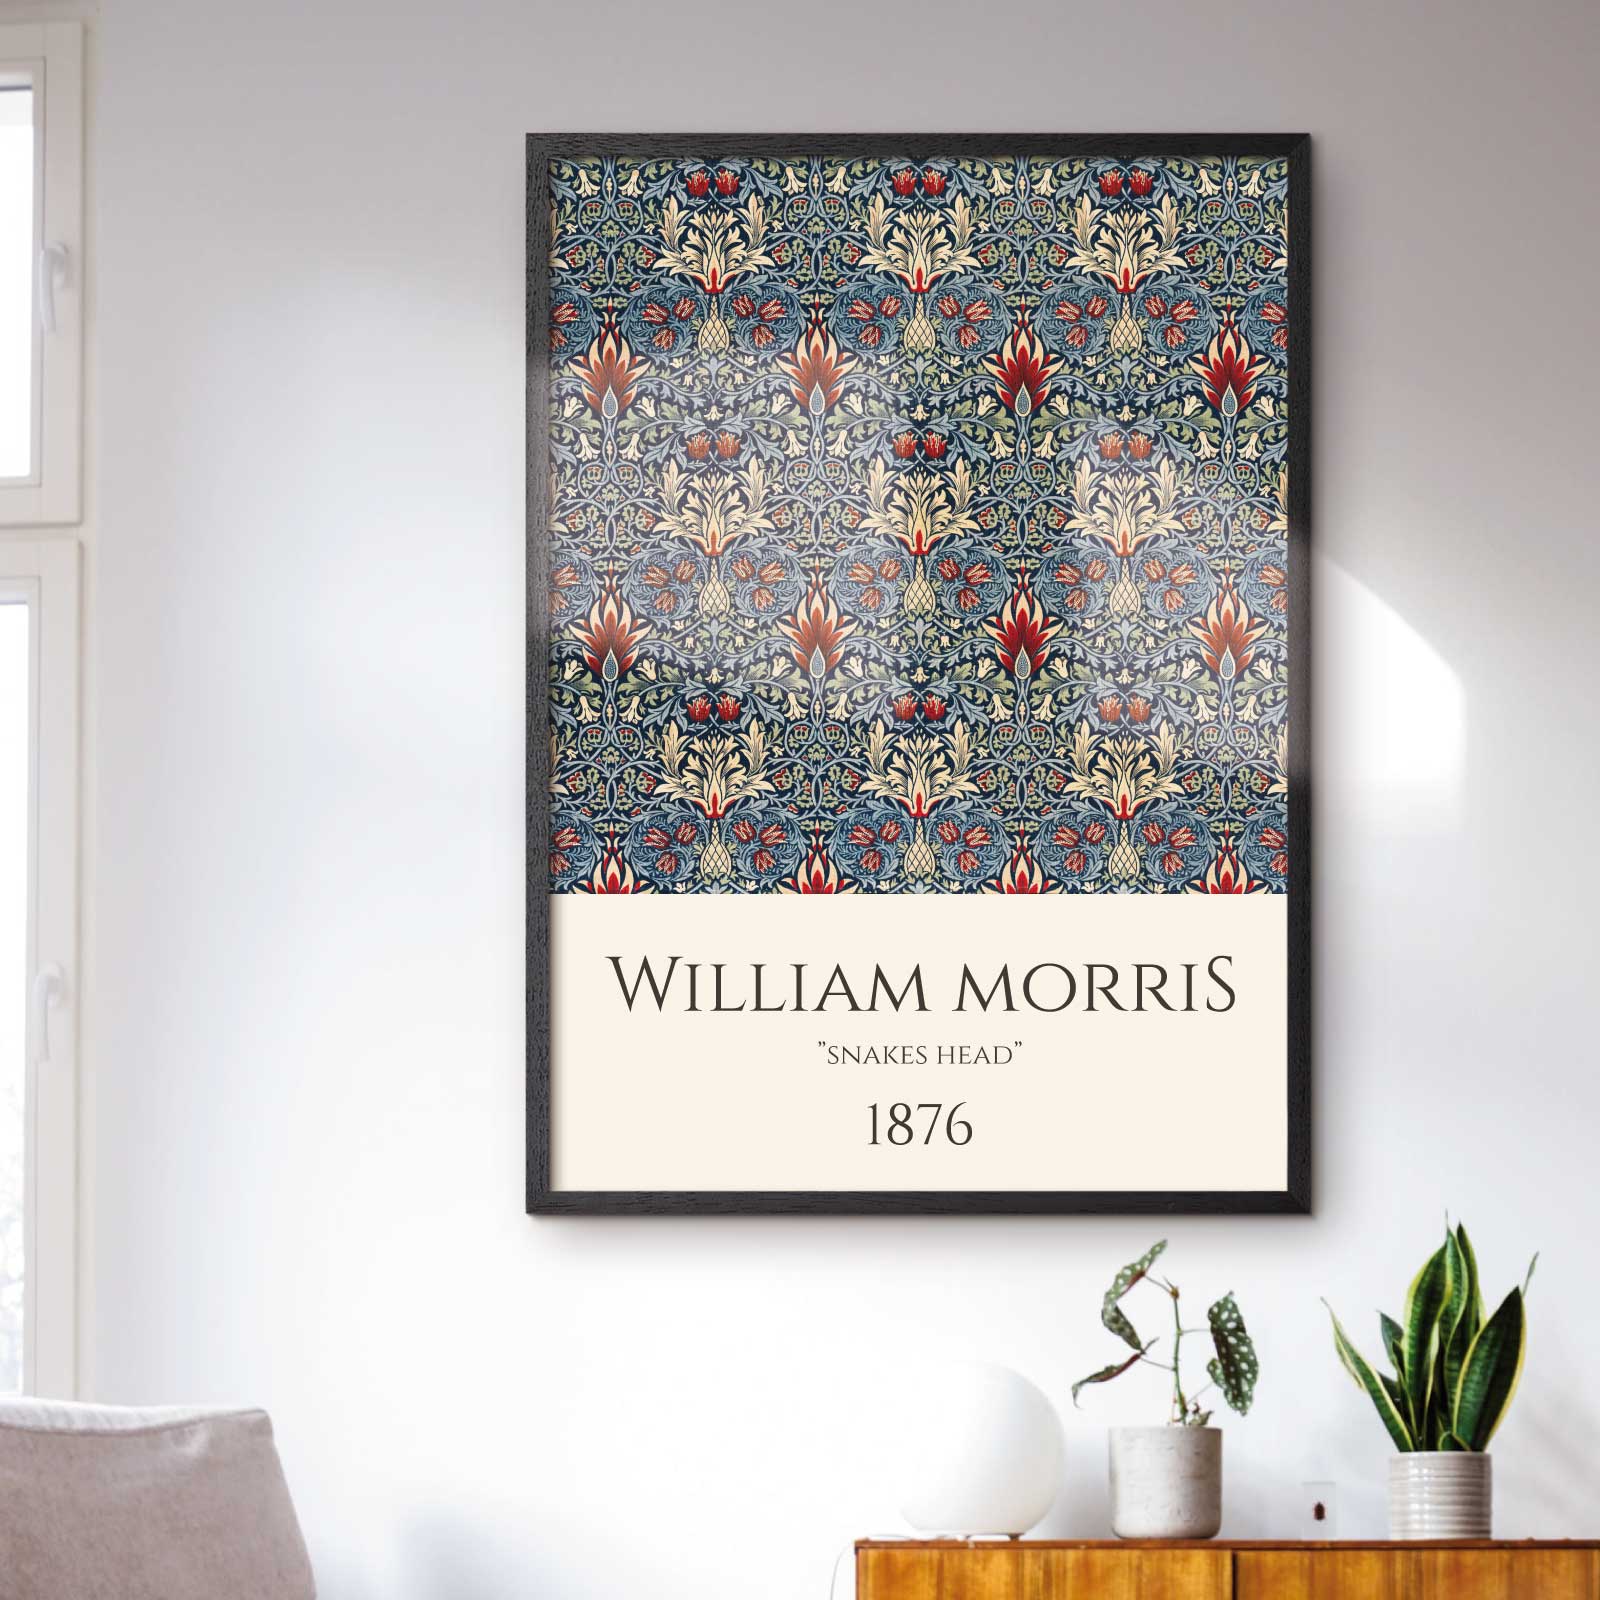 Art poster featuring William Morris work "Snakes Head"